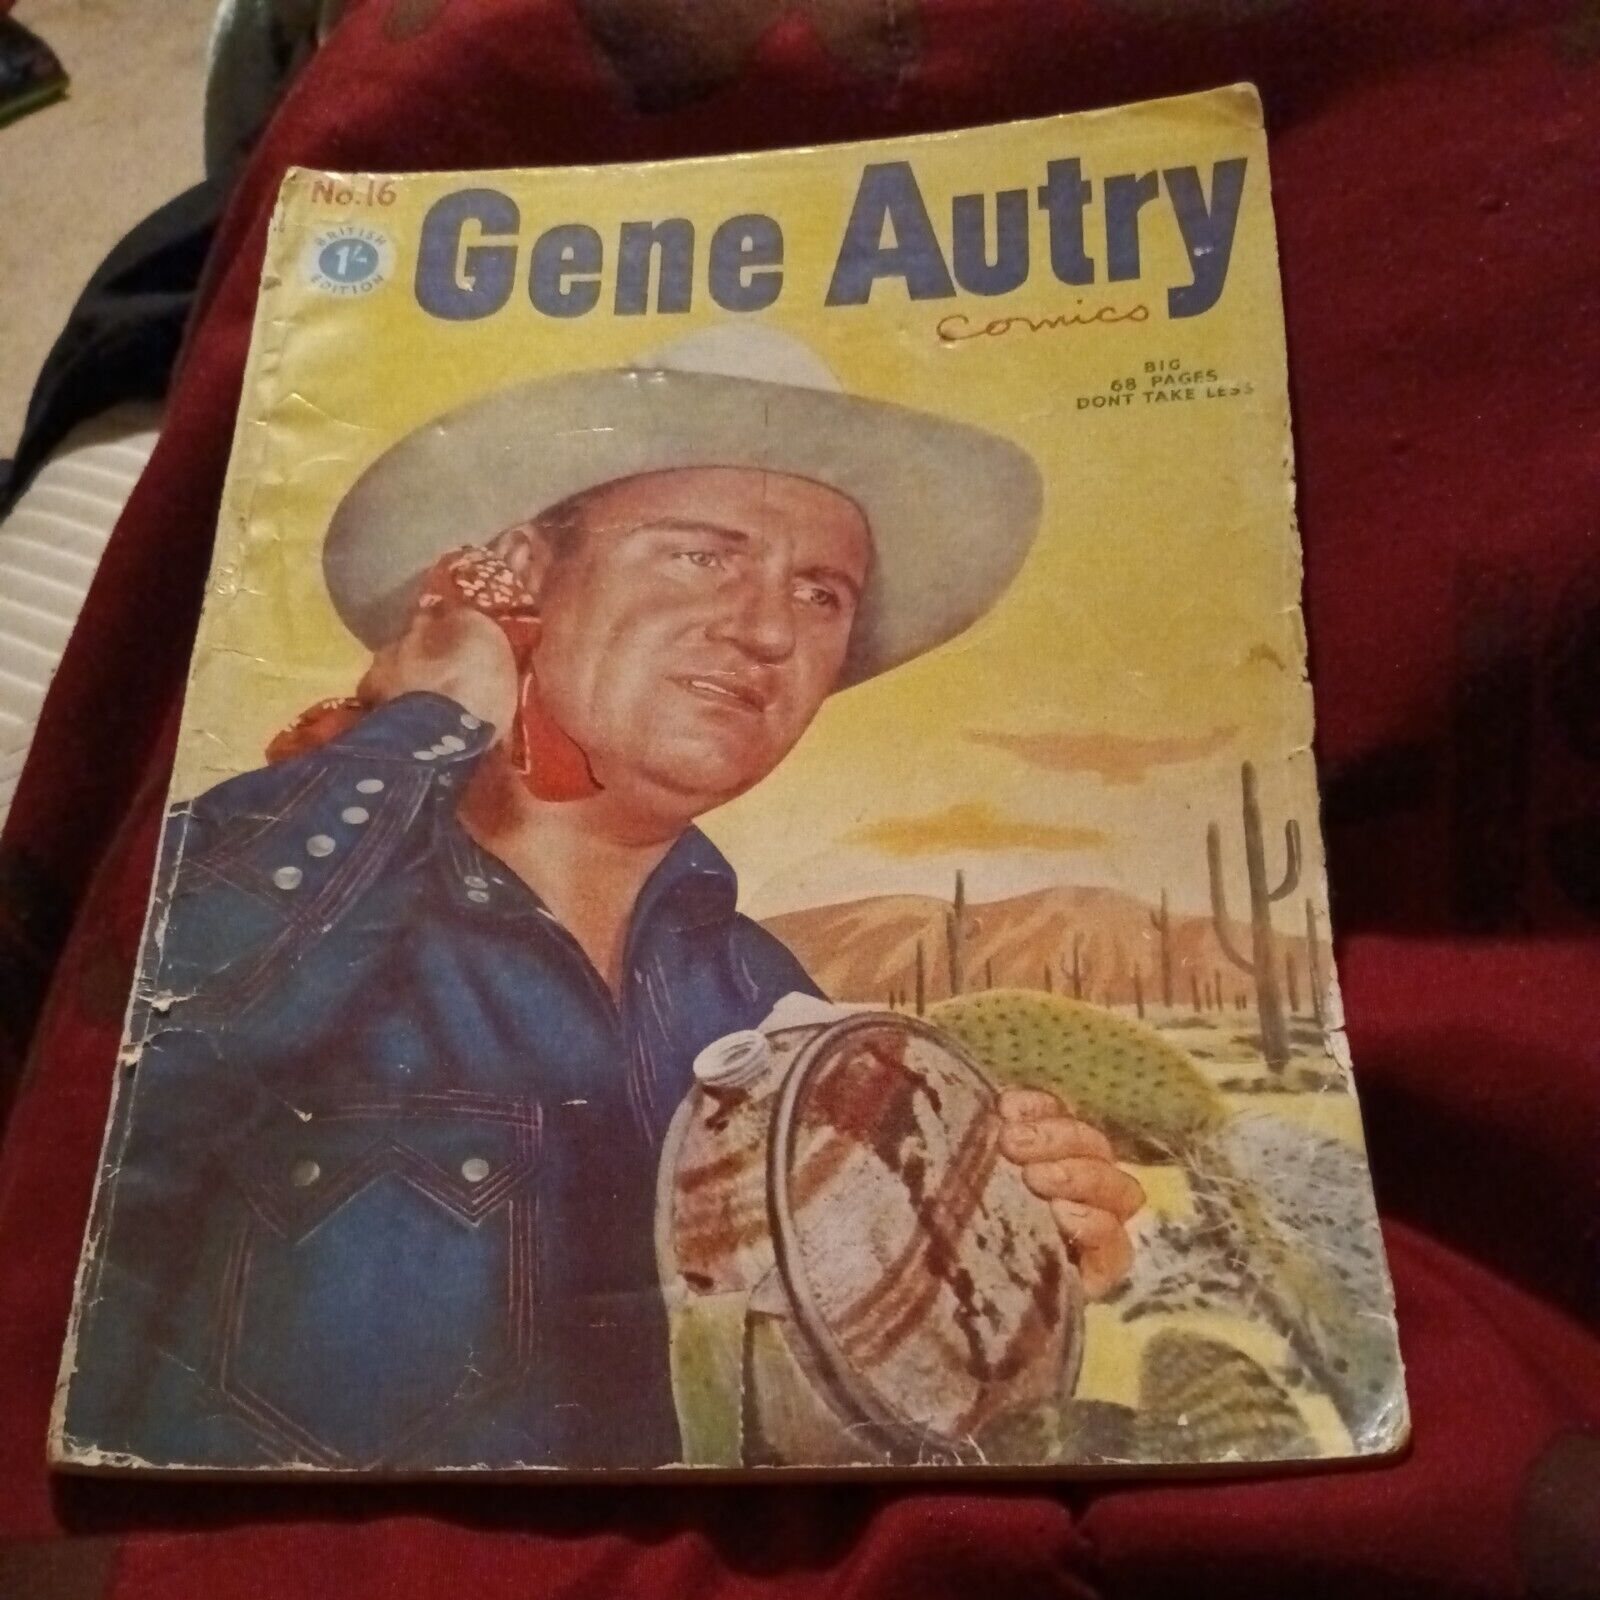 Gene Autry Comics 16 UK price variant Edition Silver Age Squarebound western 